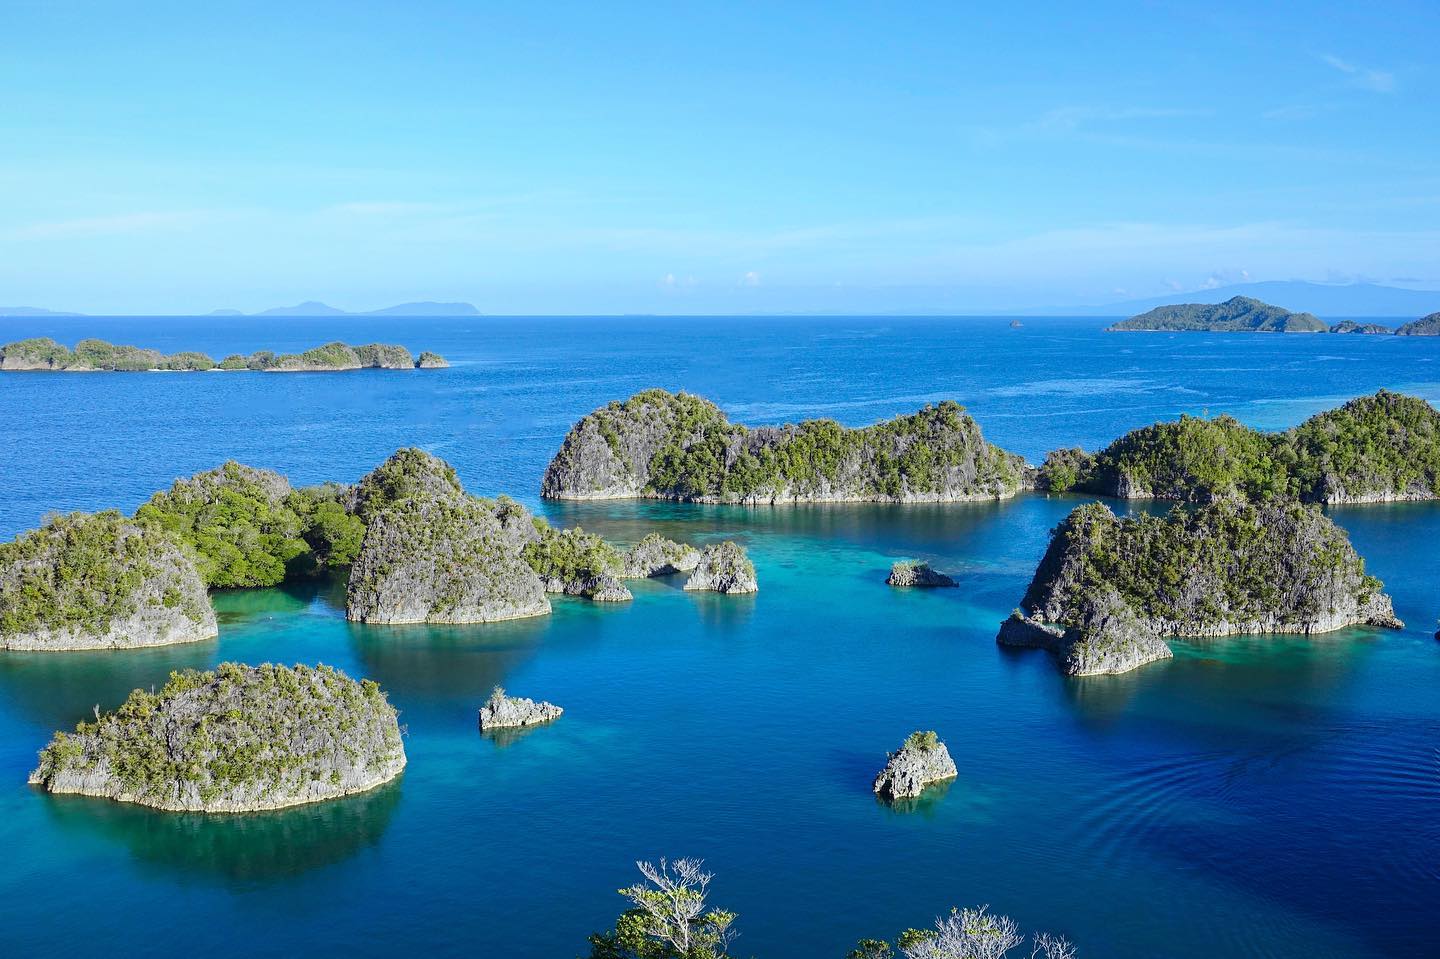 Piaynemo is an iconic must see in Raja Ampat. Stunning viewpoint. 🤩
.
Piaynemo is undoubtedly the most famous destination in Raja Ampat. Quite otherworldly, the magical seascape feels like it’s straight out of a postcard. There’s no way to exaggerate the beauty of the cluster of tiny islands scattered across the deep blue sea, surrounded by different shades of turquoise. Climb down the stairs (there are about 300 steps) from the viewpoint and you will meet a few coconut sellers.
.
.
#piaynemo #piaynemoisland #piaynemorajaampat #piaynemotrip #piaynemoislands #piaynemohomestay #piaynemoislandrajaampat
#rajaampat #lastparadise #dive #diving #liveaboard #divetrip #tauchen #bluemagic #fourkings #scubadiving #scuba #underwaterphotography #rajaampatisland #underwater #rajaampatdiving #dive #capekri #mares #padi @maresjustaddwater @paditravel @paditv @girlsthatscuba @ssi_international #misool #diversity #diver #divers #scubadiver